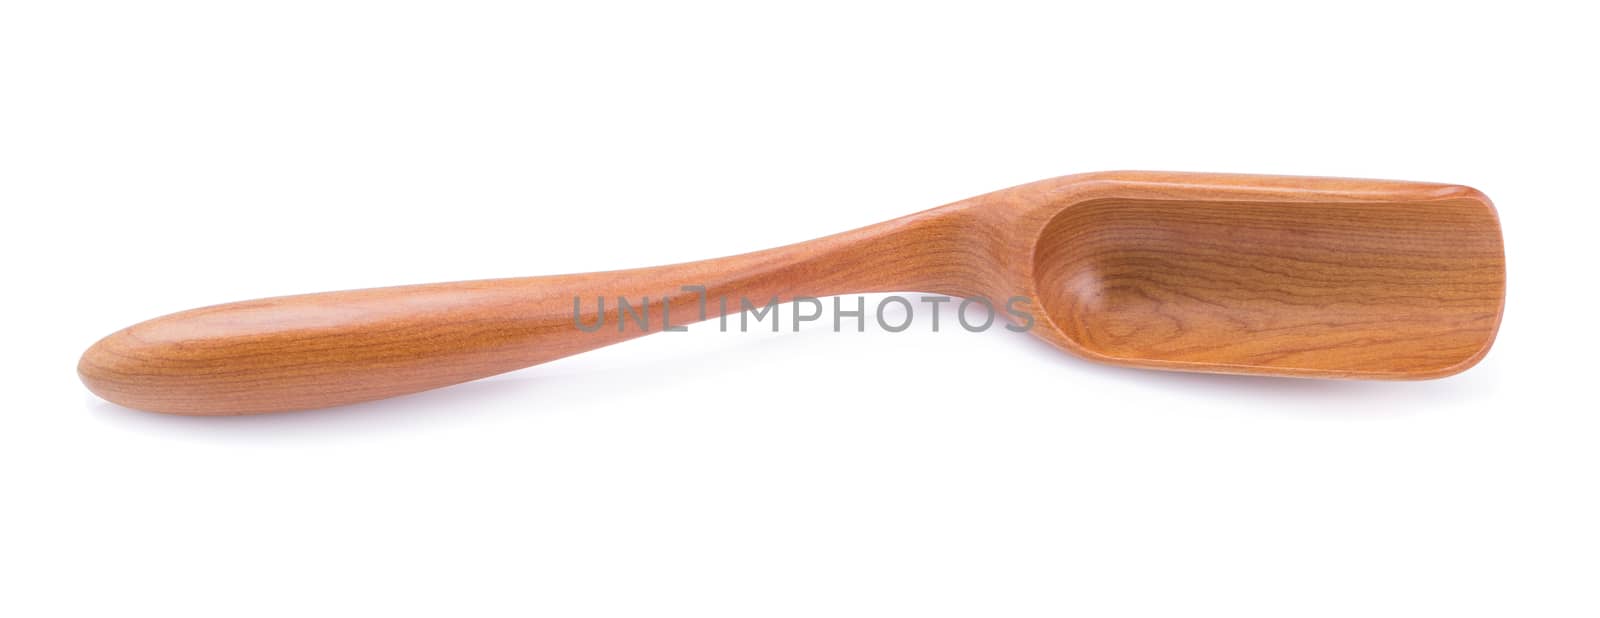 Wooden spoon on a white background by kaiskynet